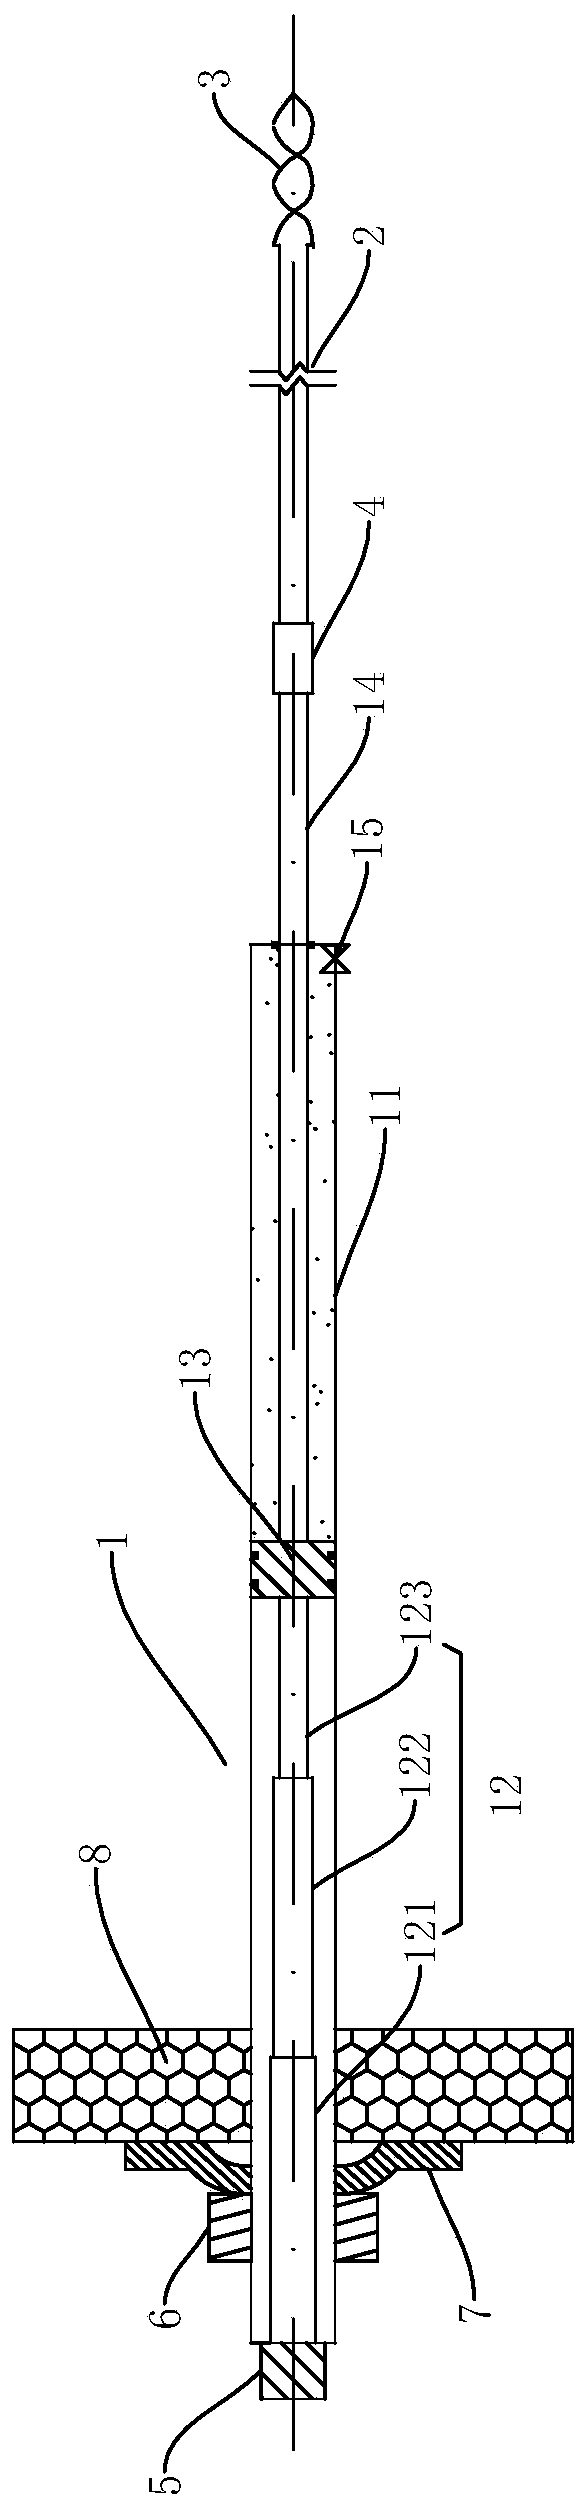 A detachable hydraulic anchor rod and its support method for steady-state pressure release